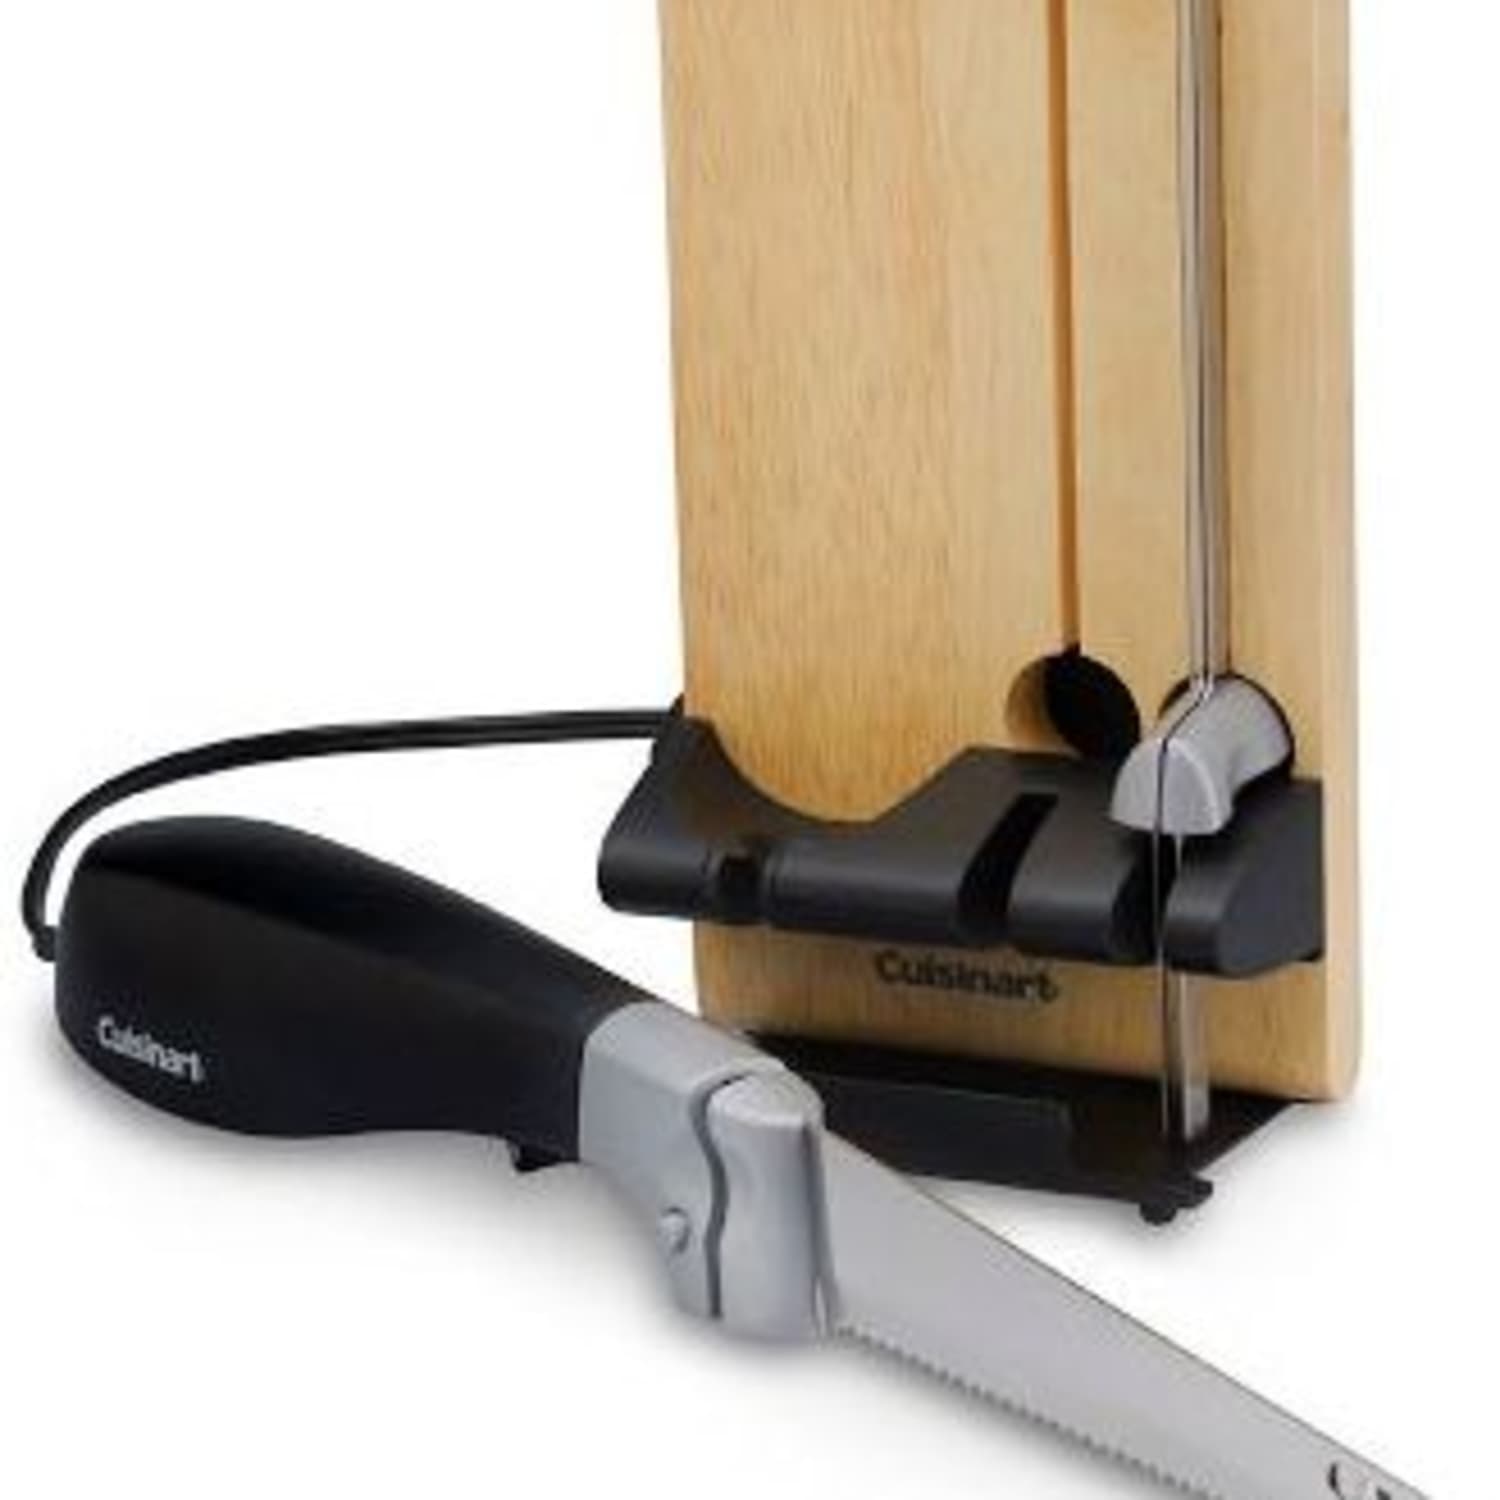 Cuisinart Electric Carving Knives & Electric Kitchen Knives